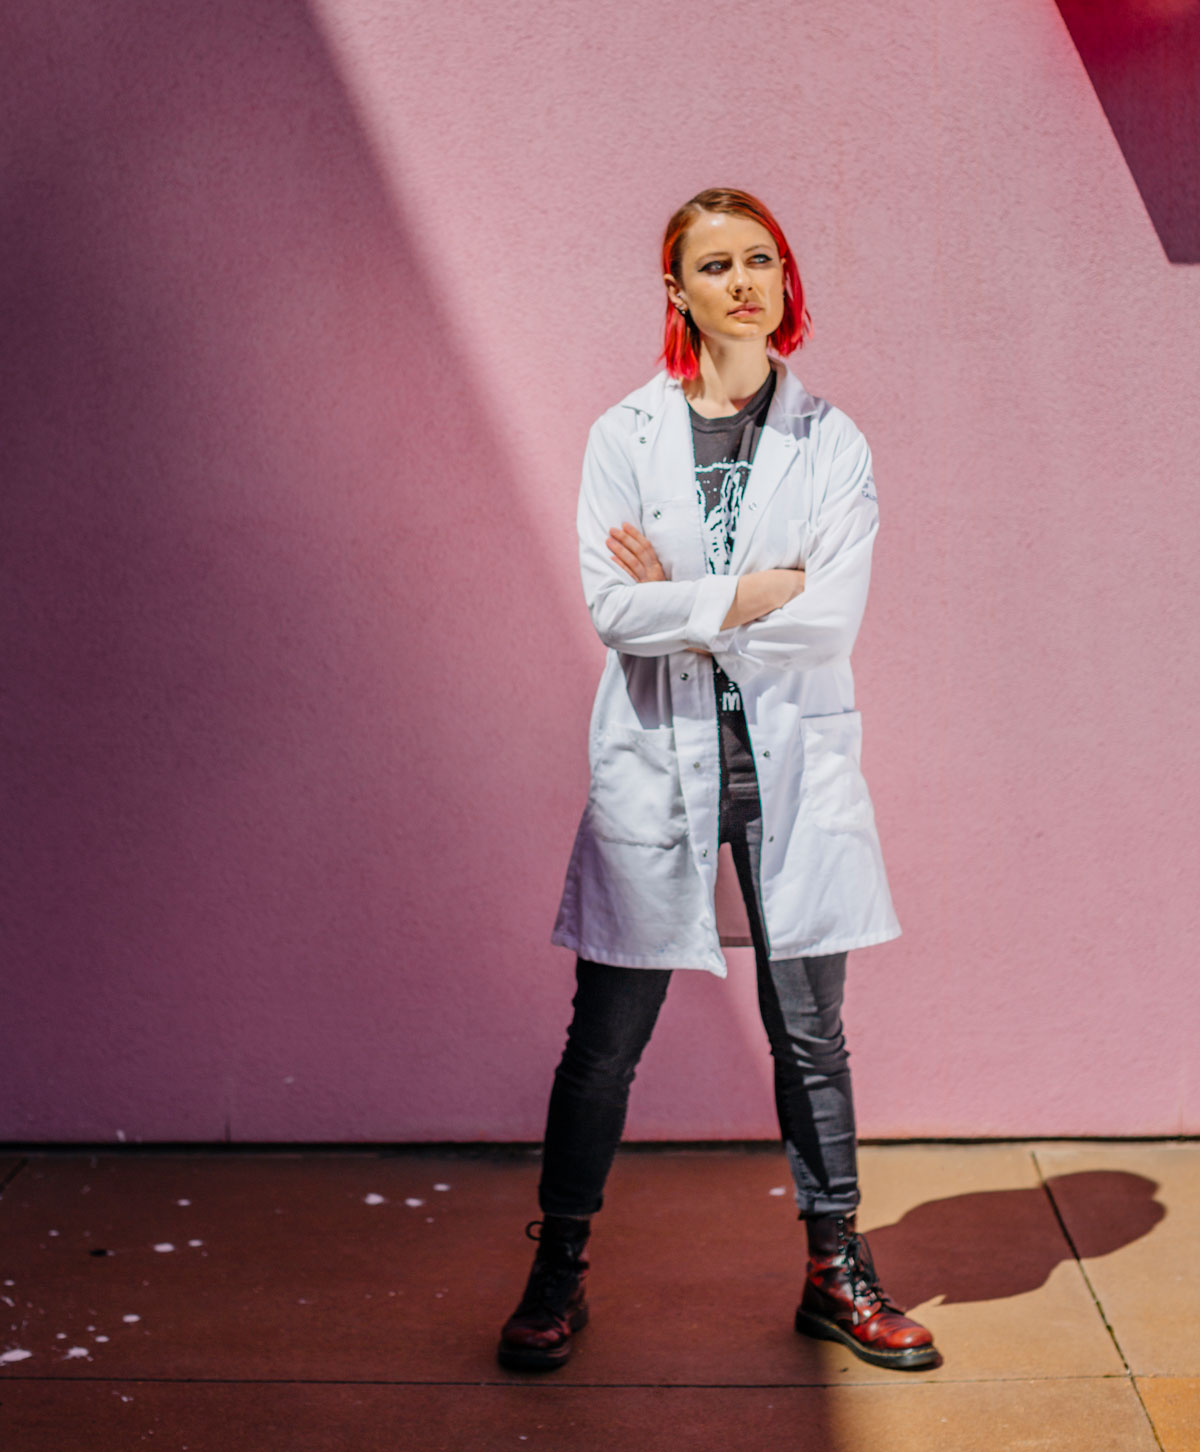 Female student in lab coat and combat boots in front of a pink wall